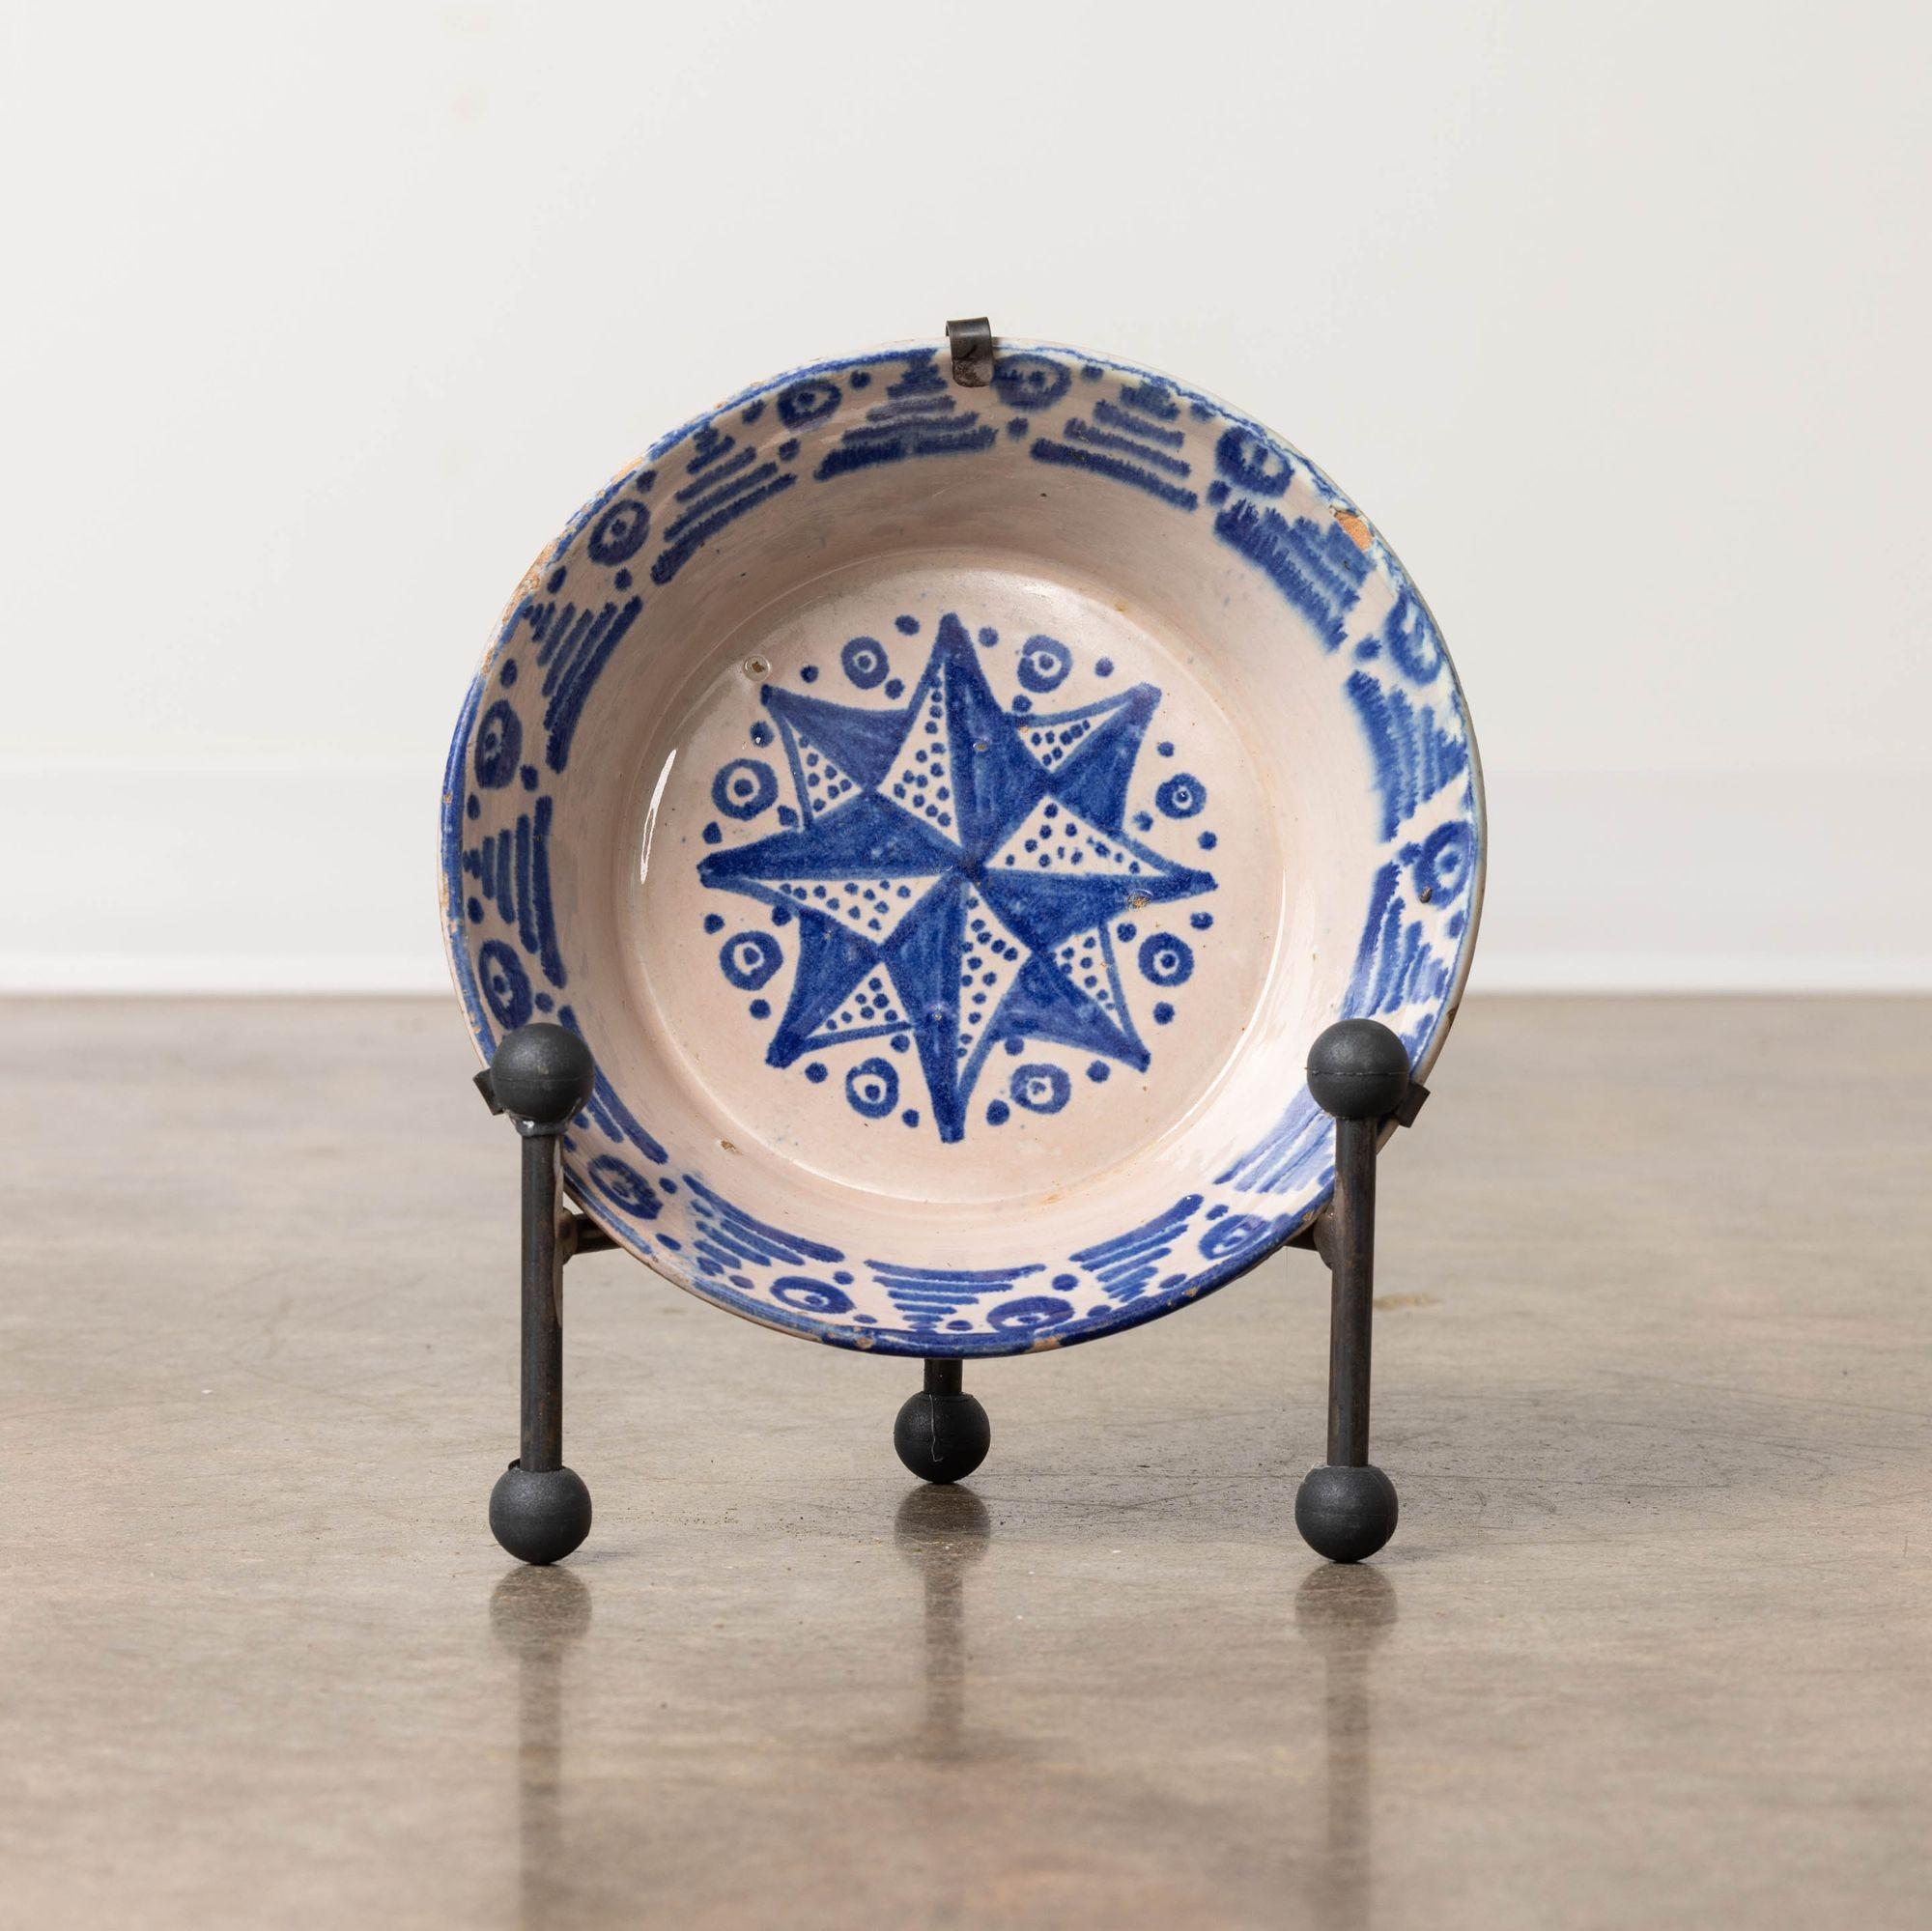 19th c. earthenware bowl from Granada, Spain painted in blue over a milk-white glaze. This deep bowl features a hand-painted star design on the bottom of the bowl with decorative sides. Sold with both a hand-forged iron stand and wall-mount hanger.